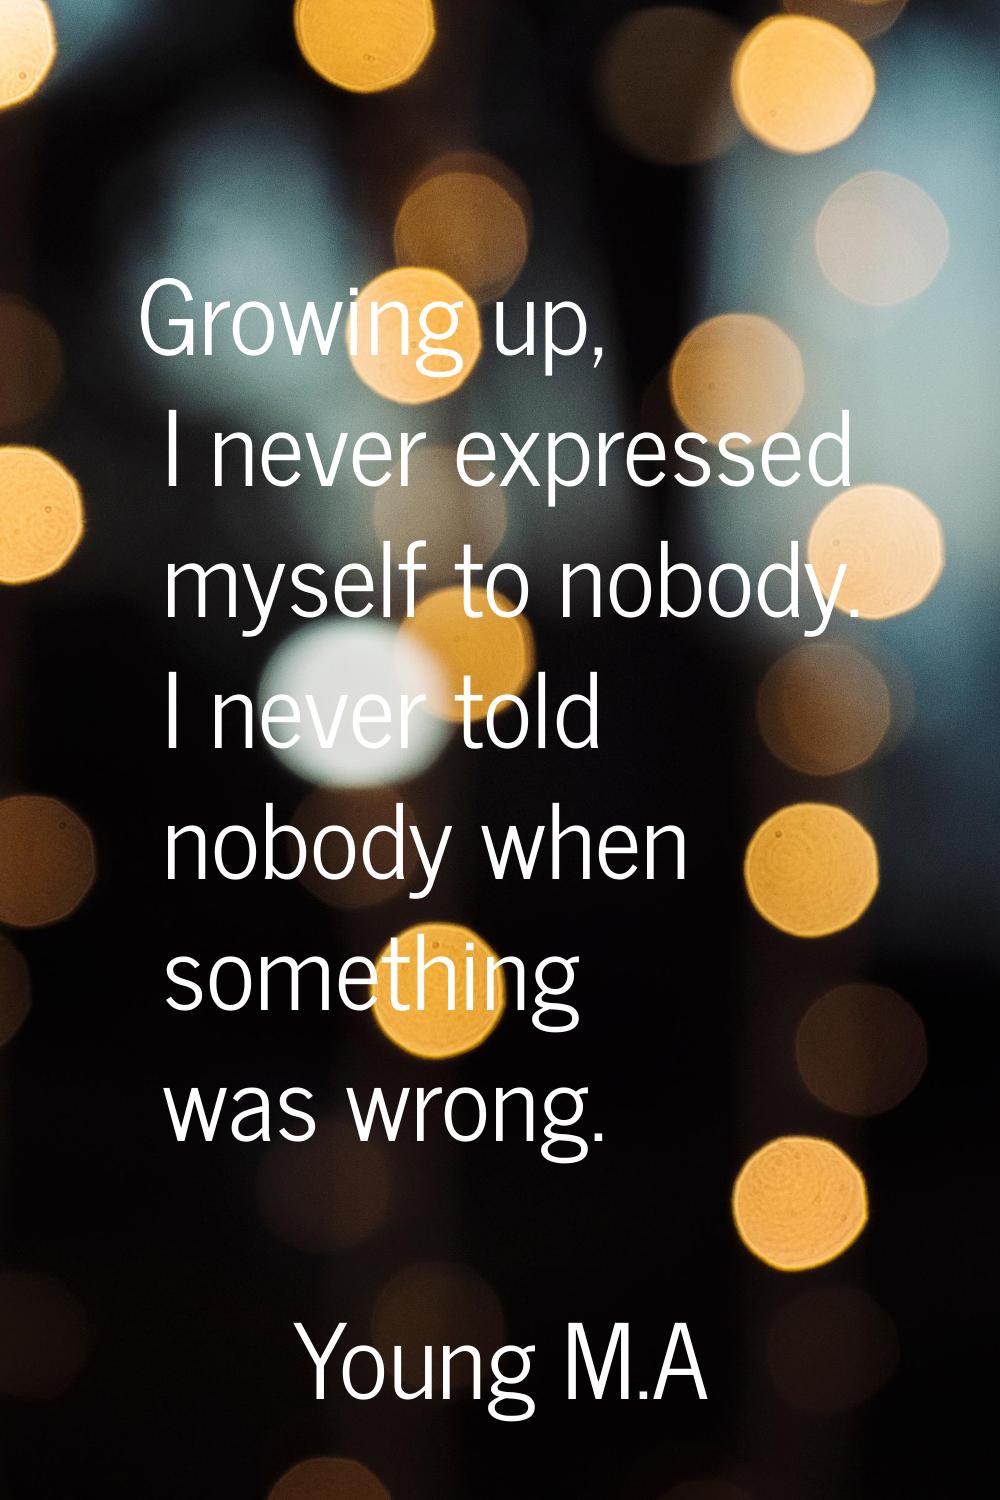 Growing up, I never expressed myself to nobody. I never told nobody when something was wrong.